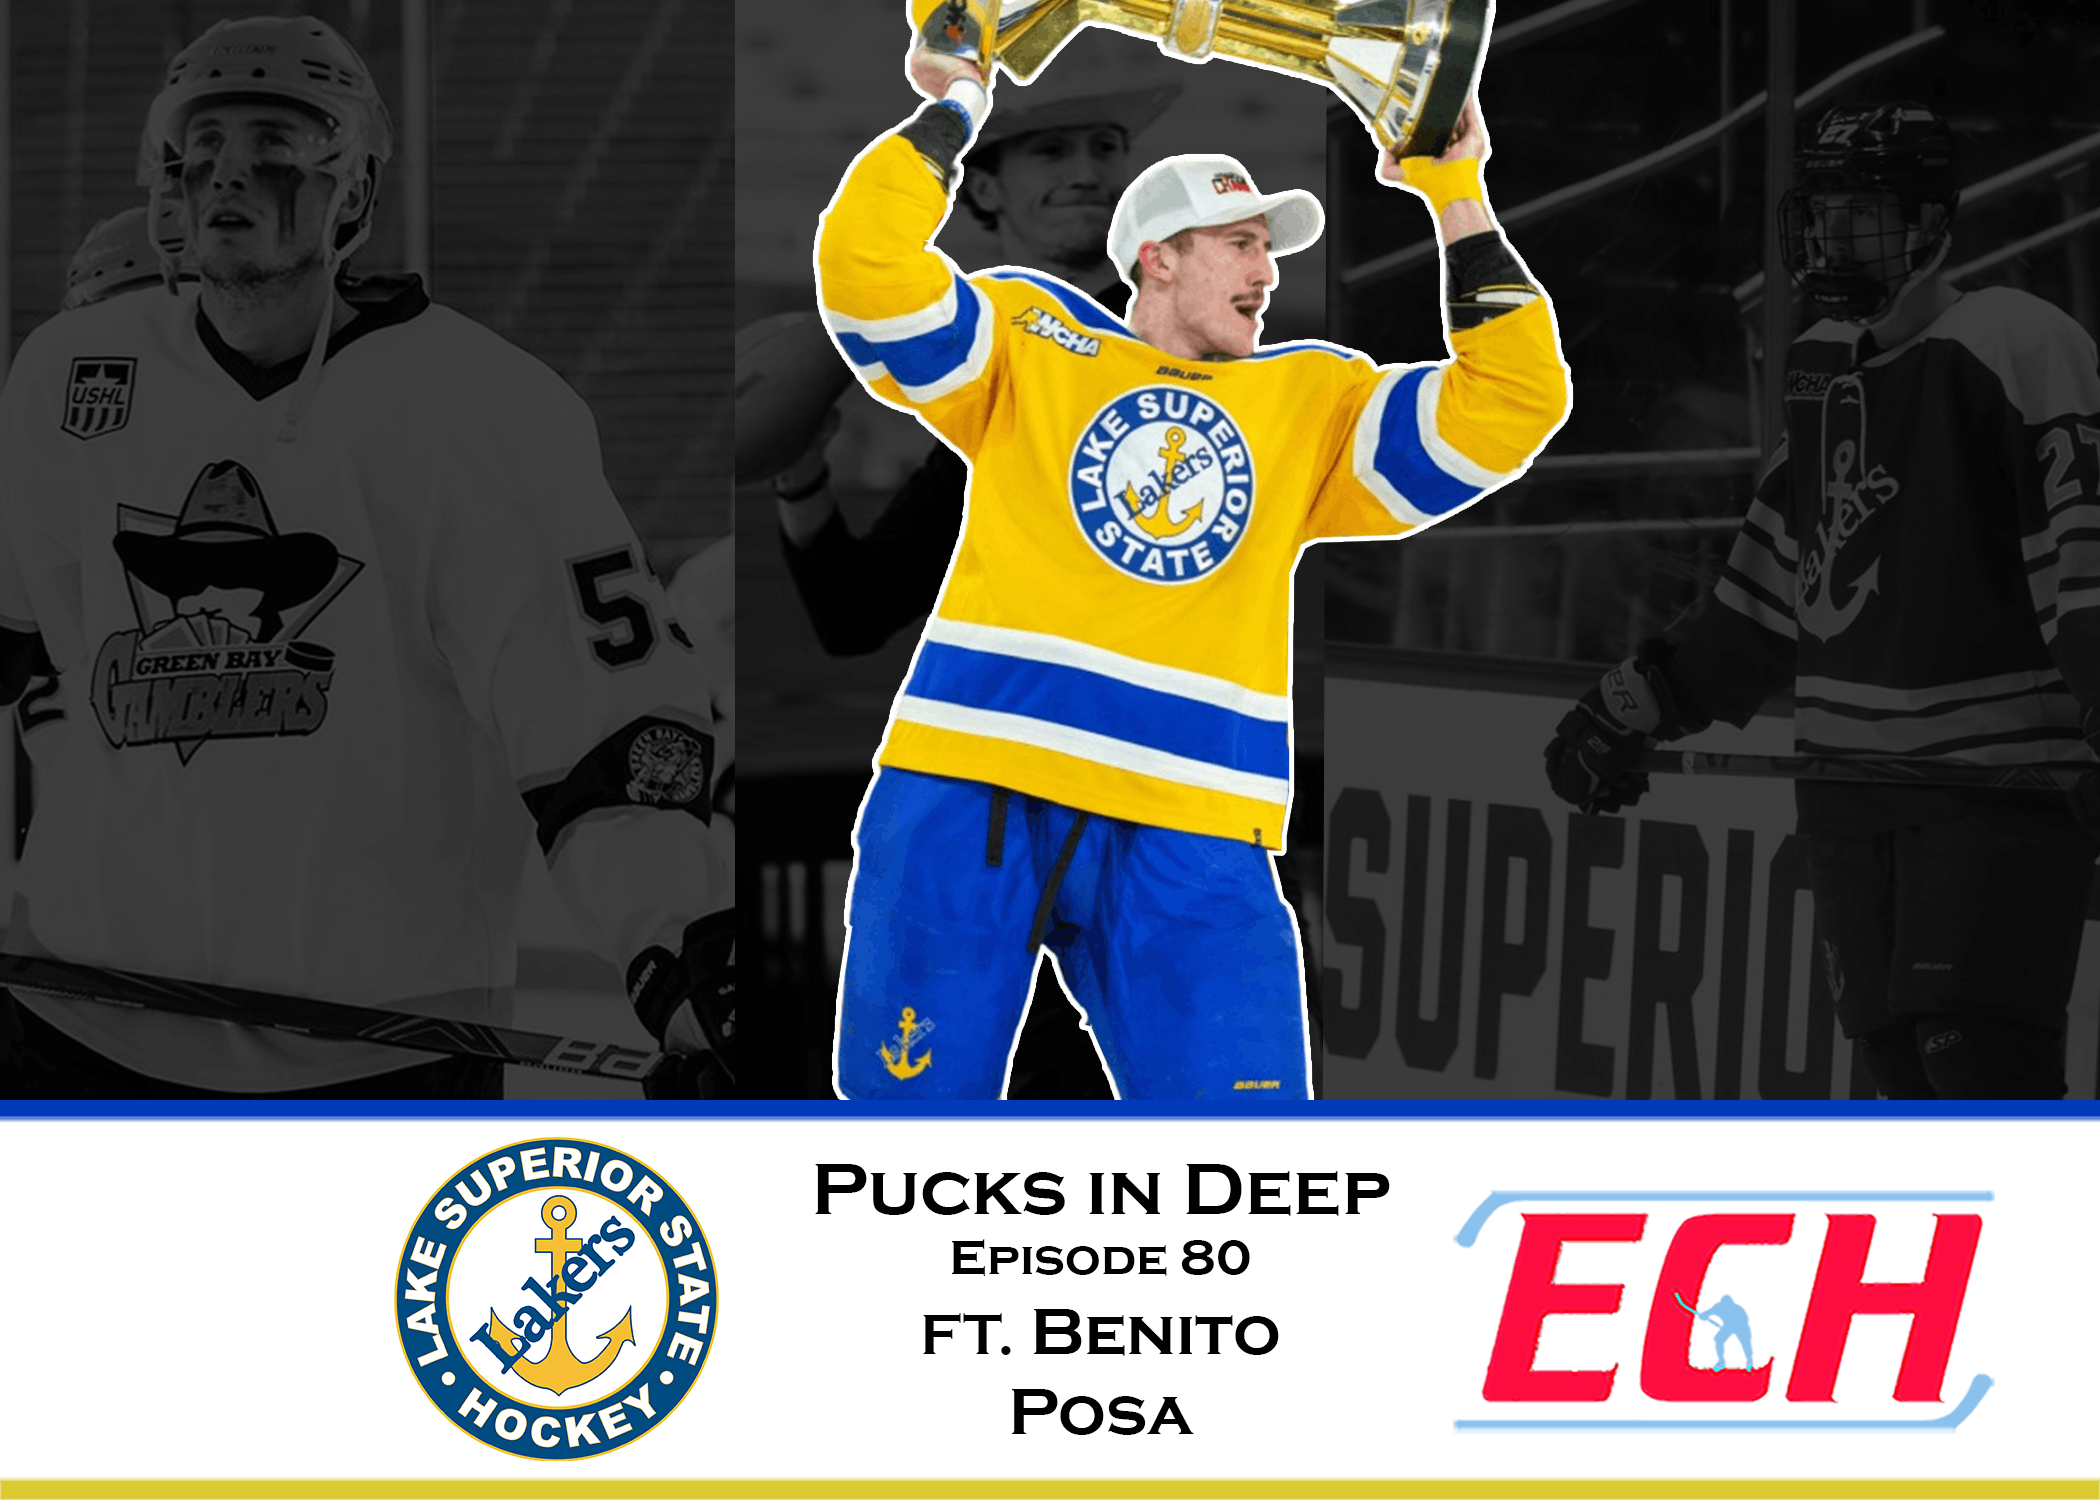 Episode #80 of Pucks in Deep Feat: Benito Posa